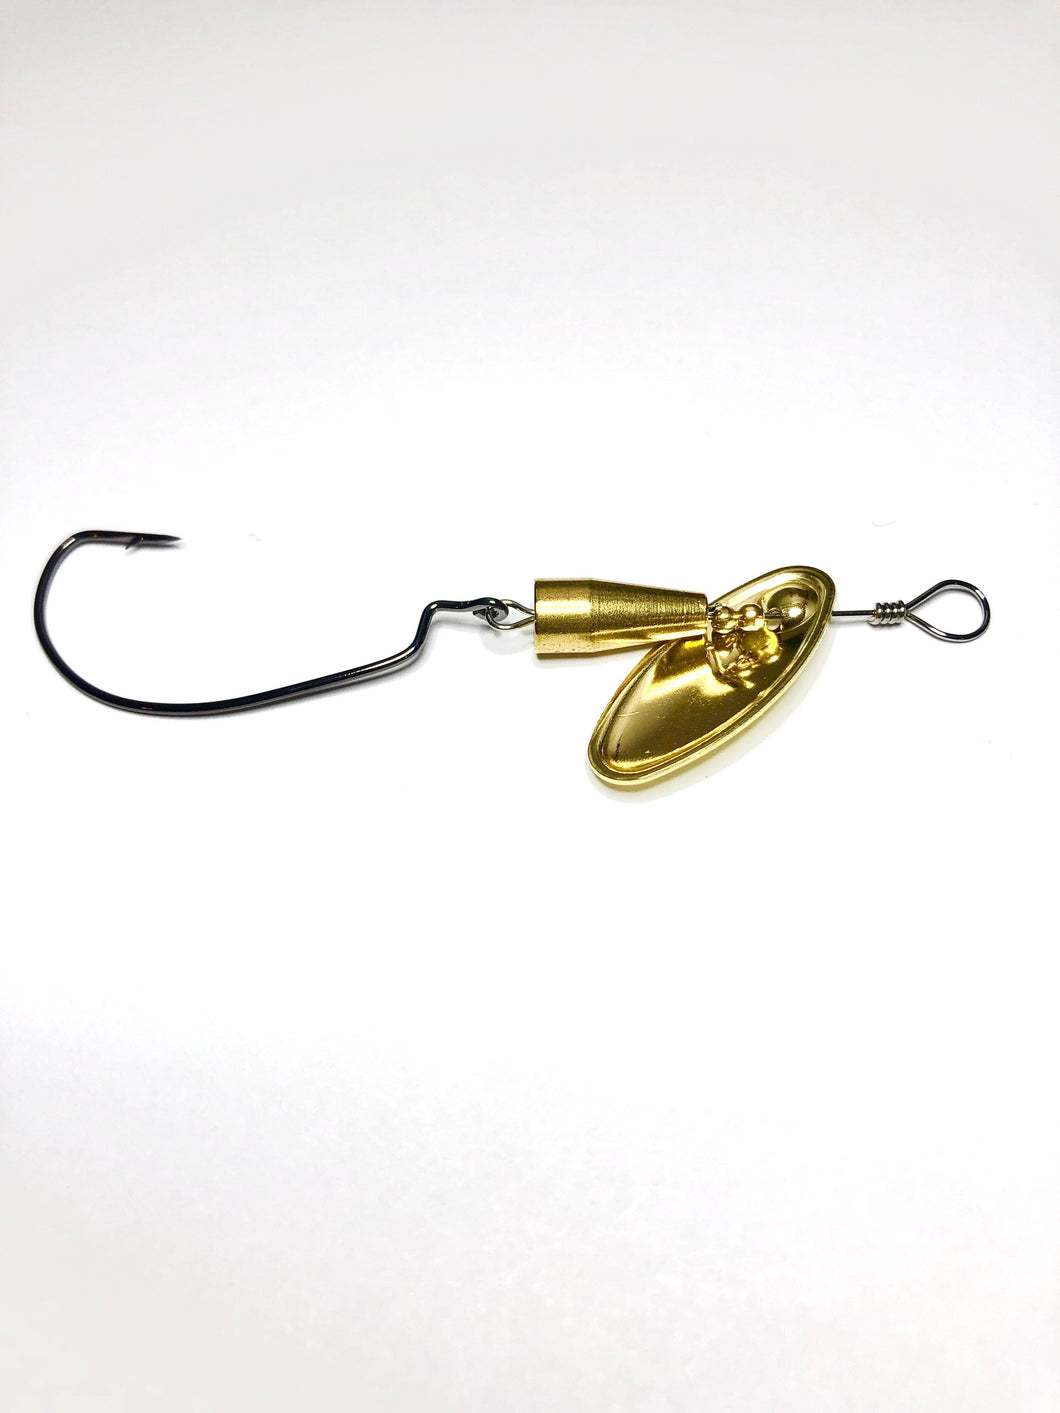 Brass Spinner Swimmer (Dangle Lures Darla). The 'finesse' spinnerbait, great lure for pond fishing.